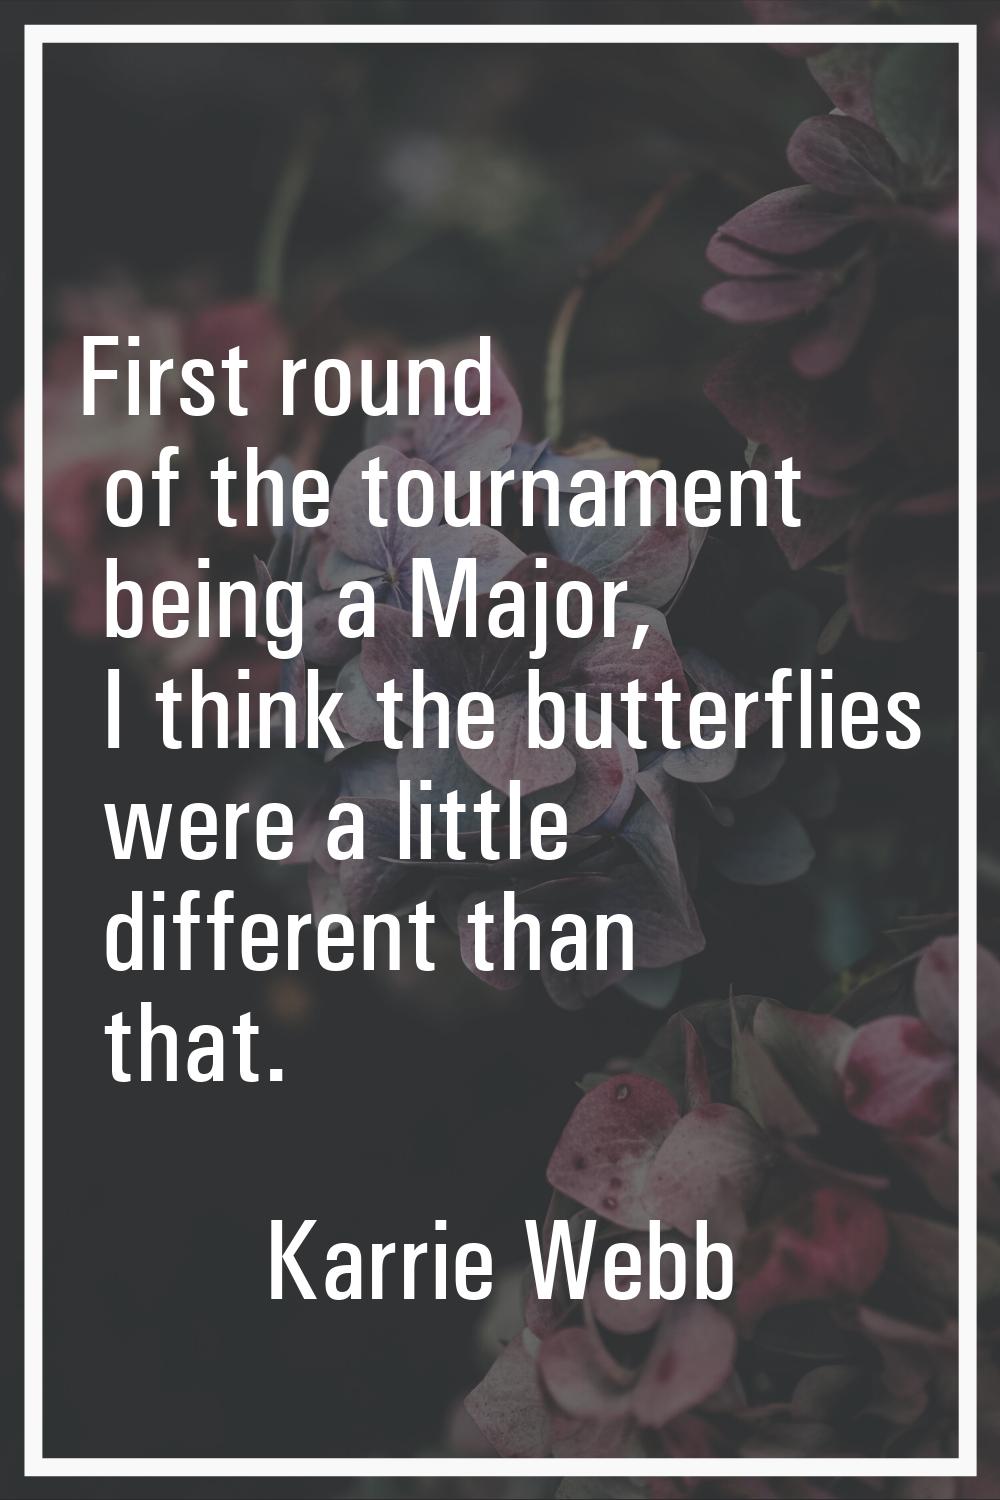 First round of the tournament being a Major, I think the butterflies were a little different than t